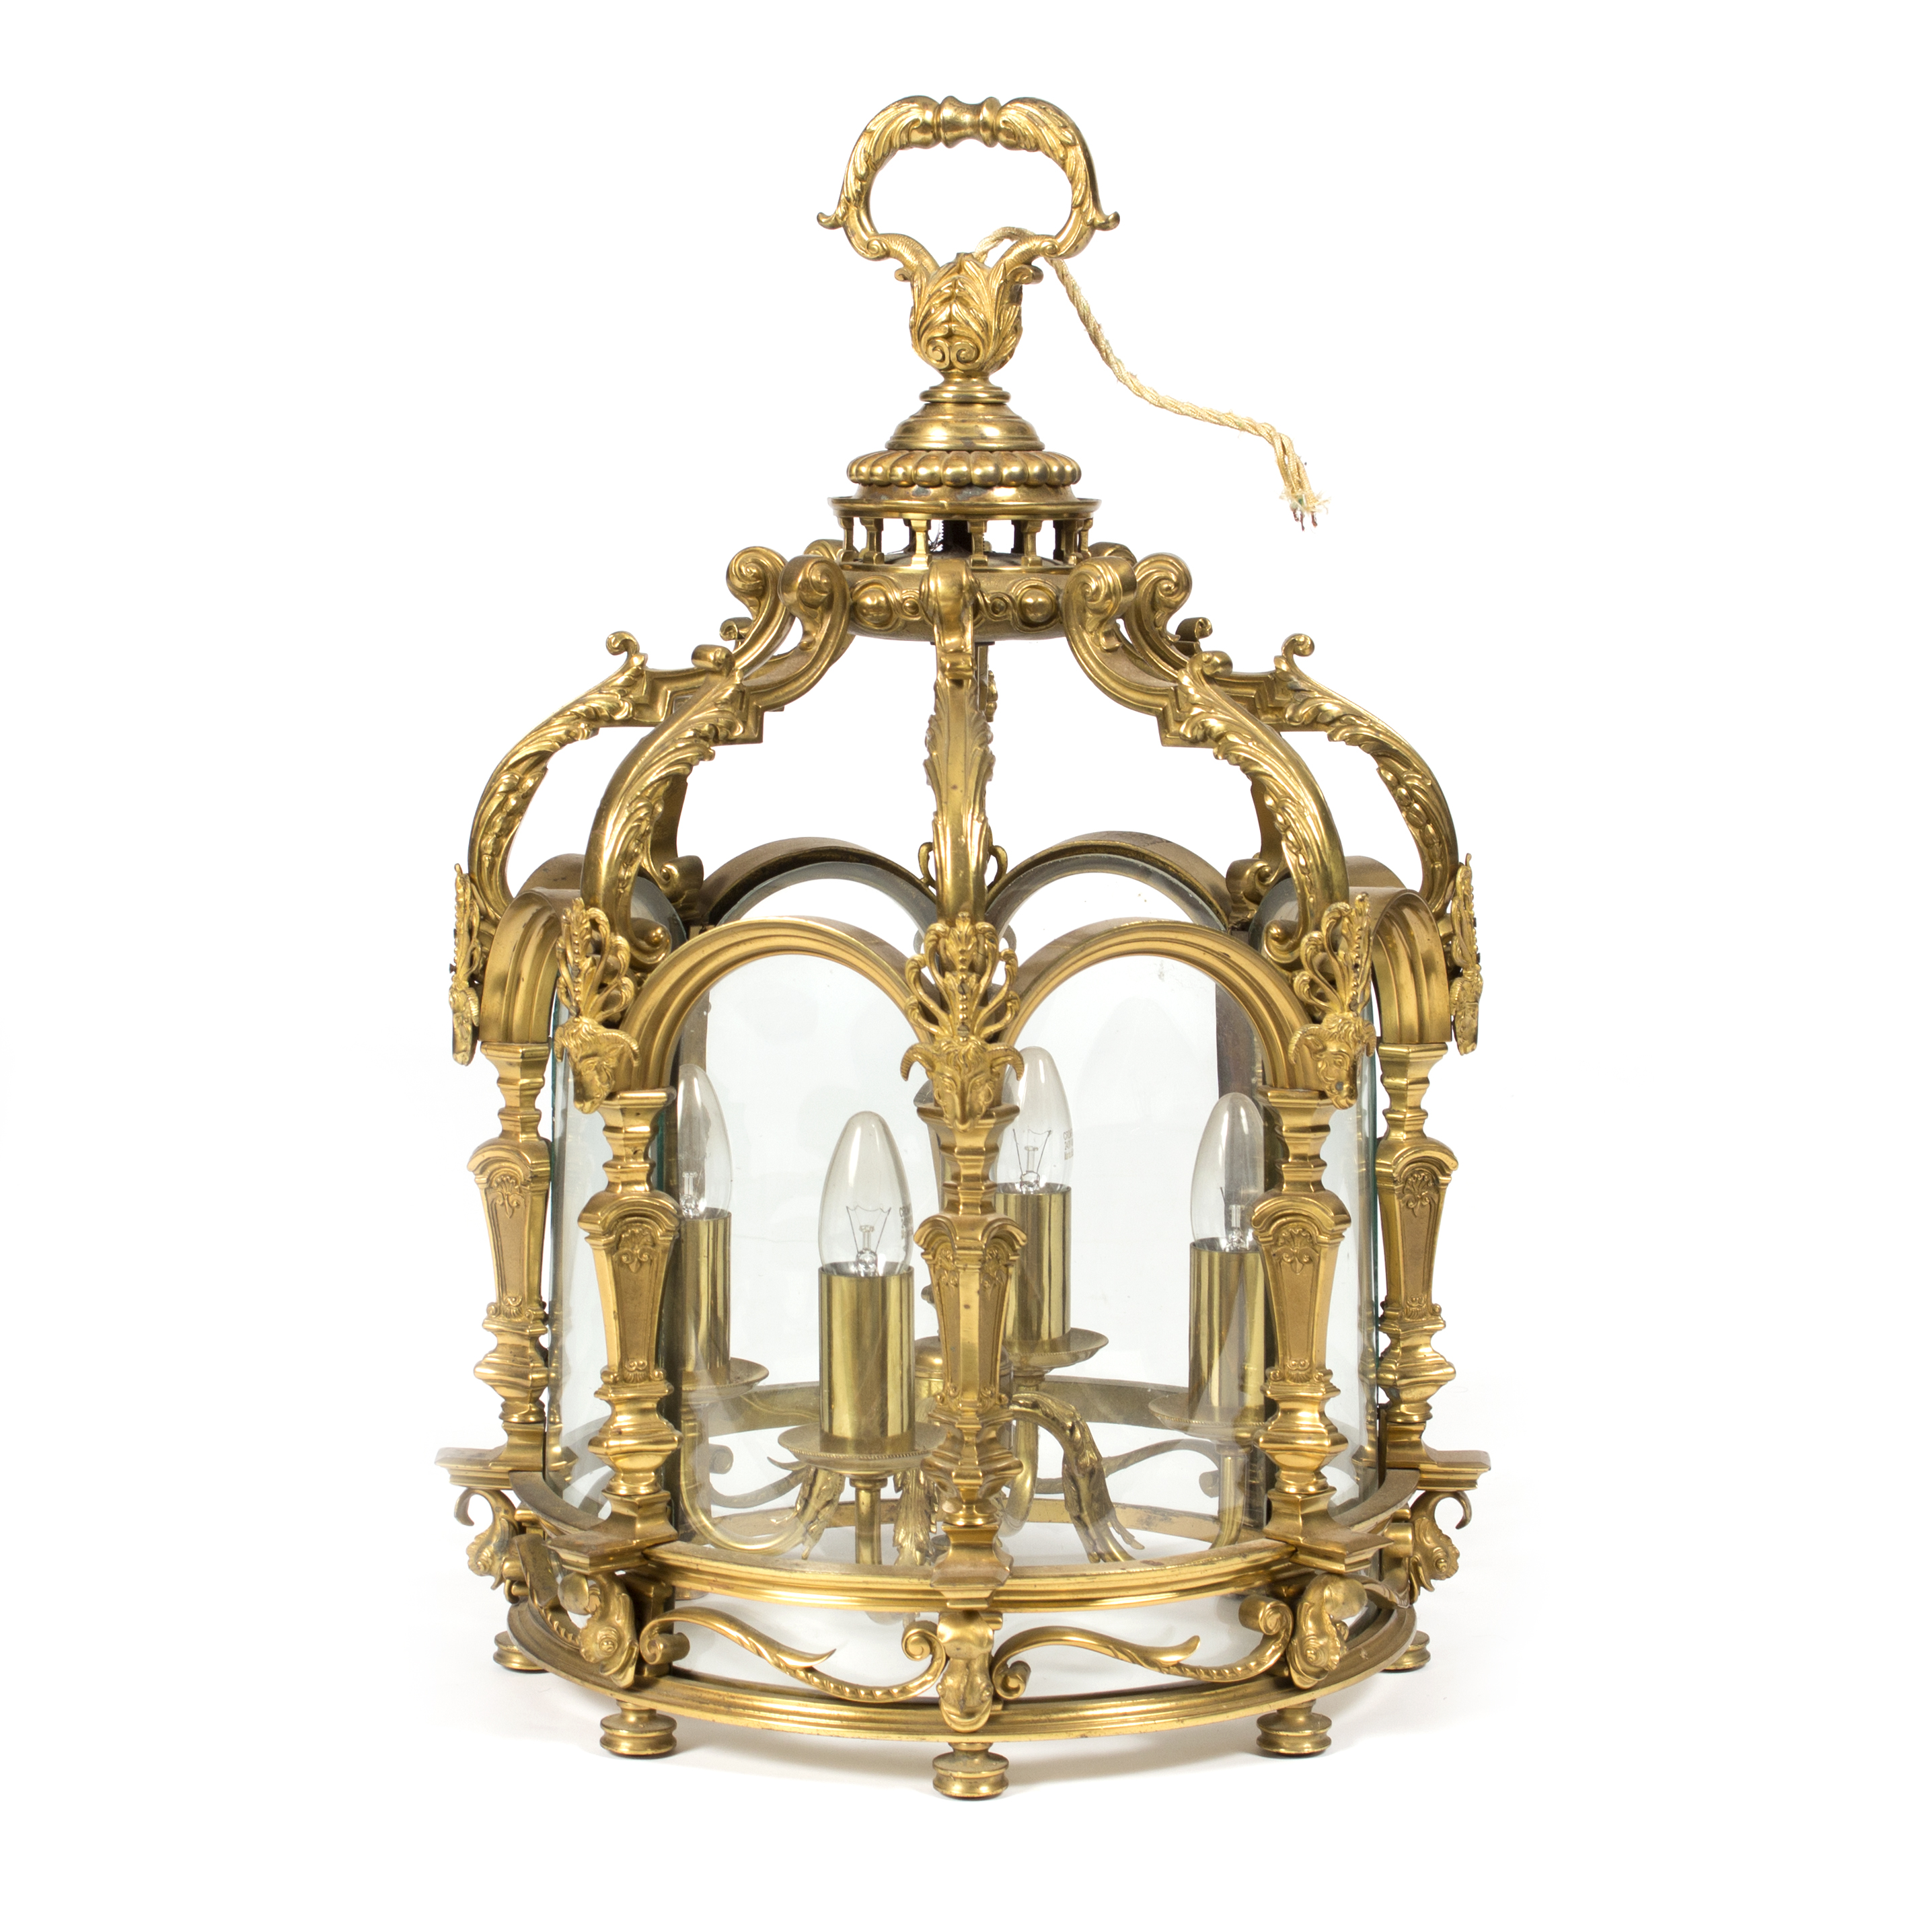 A Louis XIV style bronze hall lantern of octagonal shape with arched glazed panels,